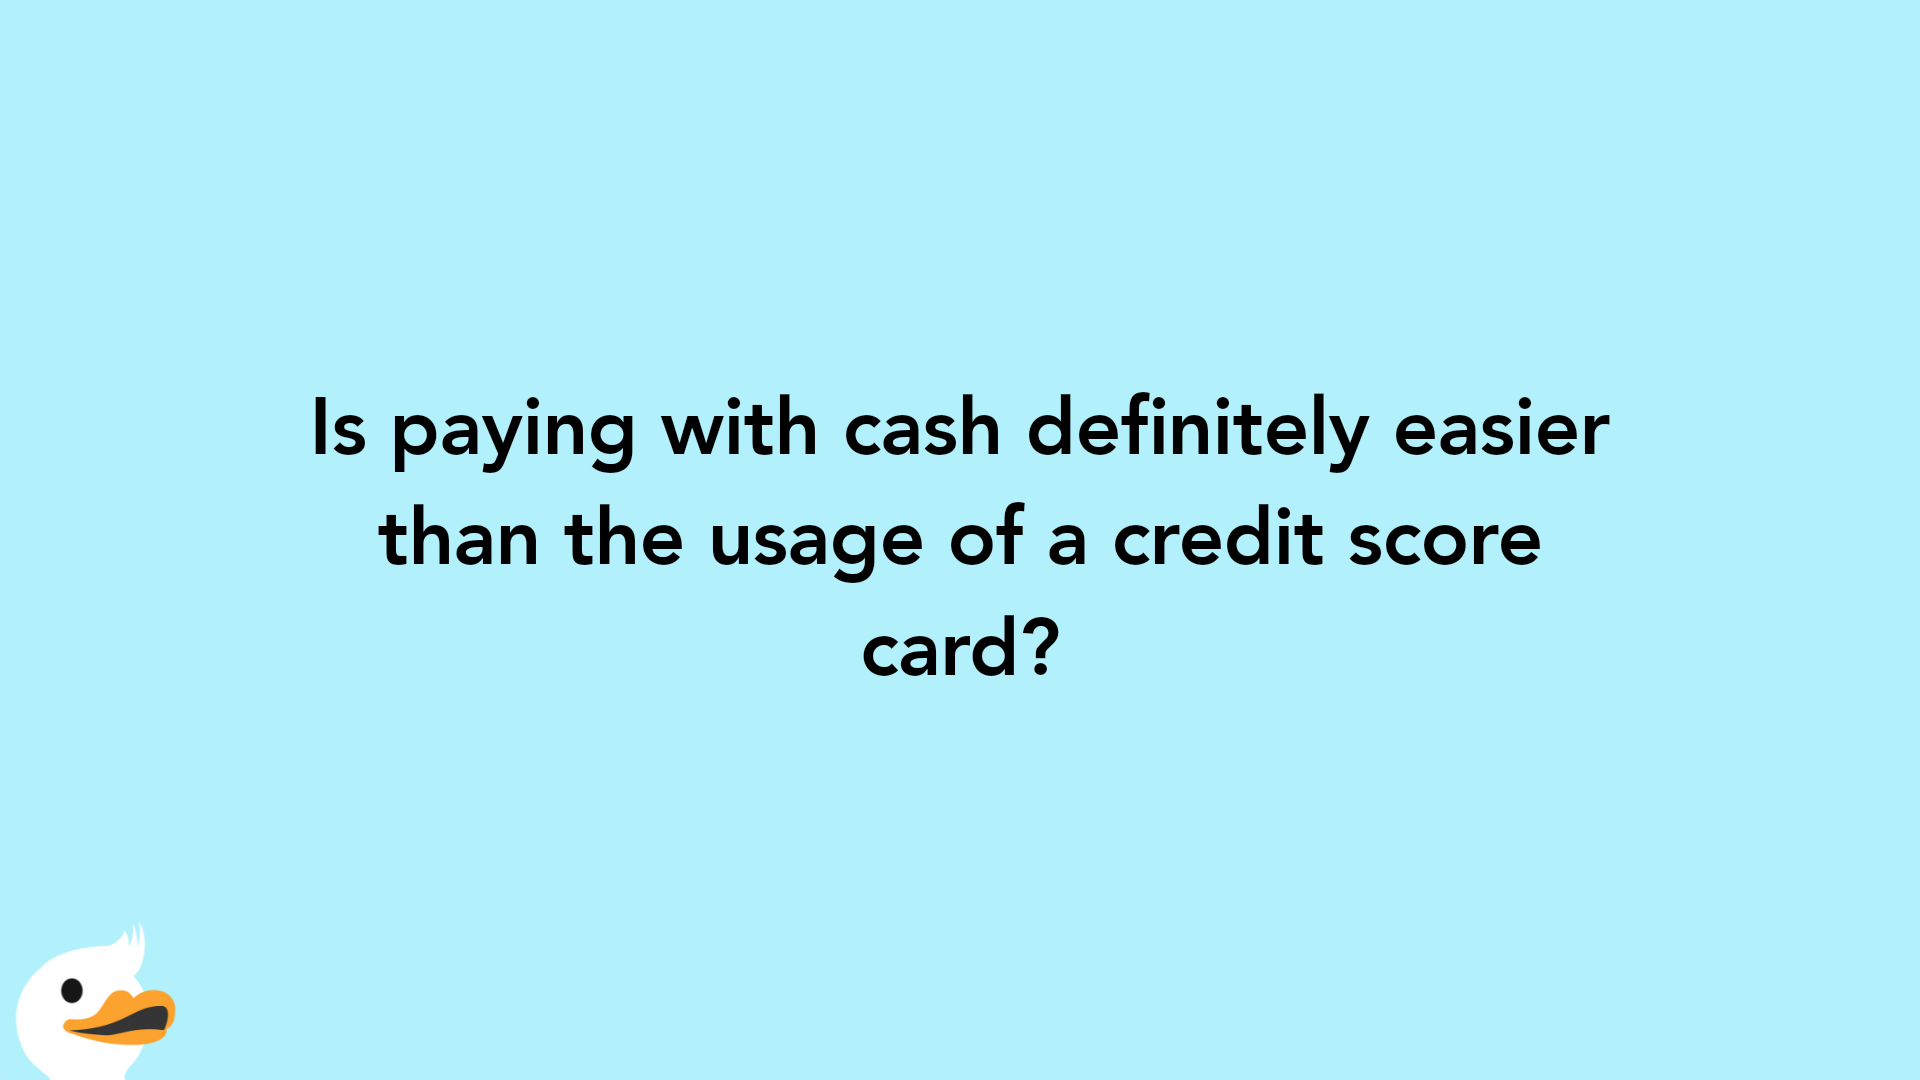 Is paying with cash definitely easier than the usage of a credit score card?